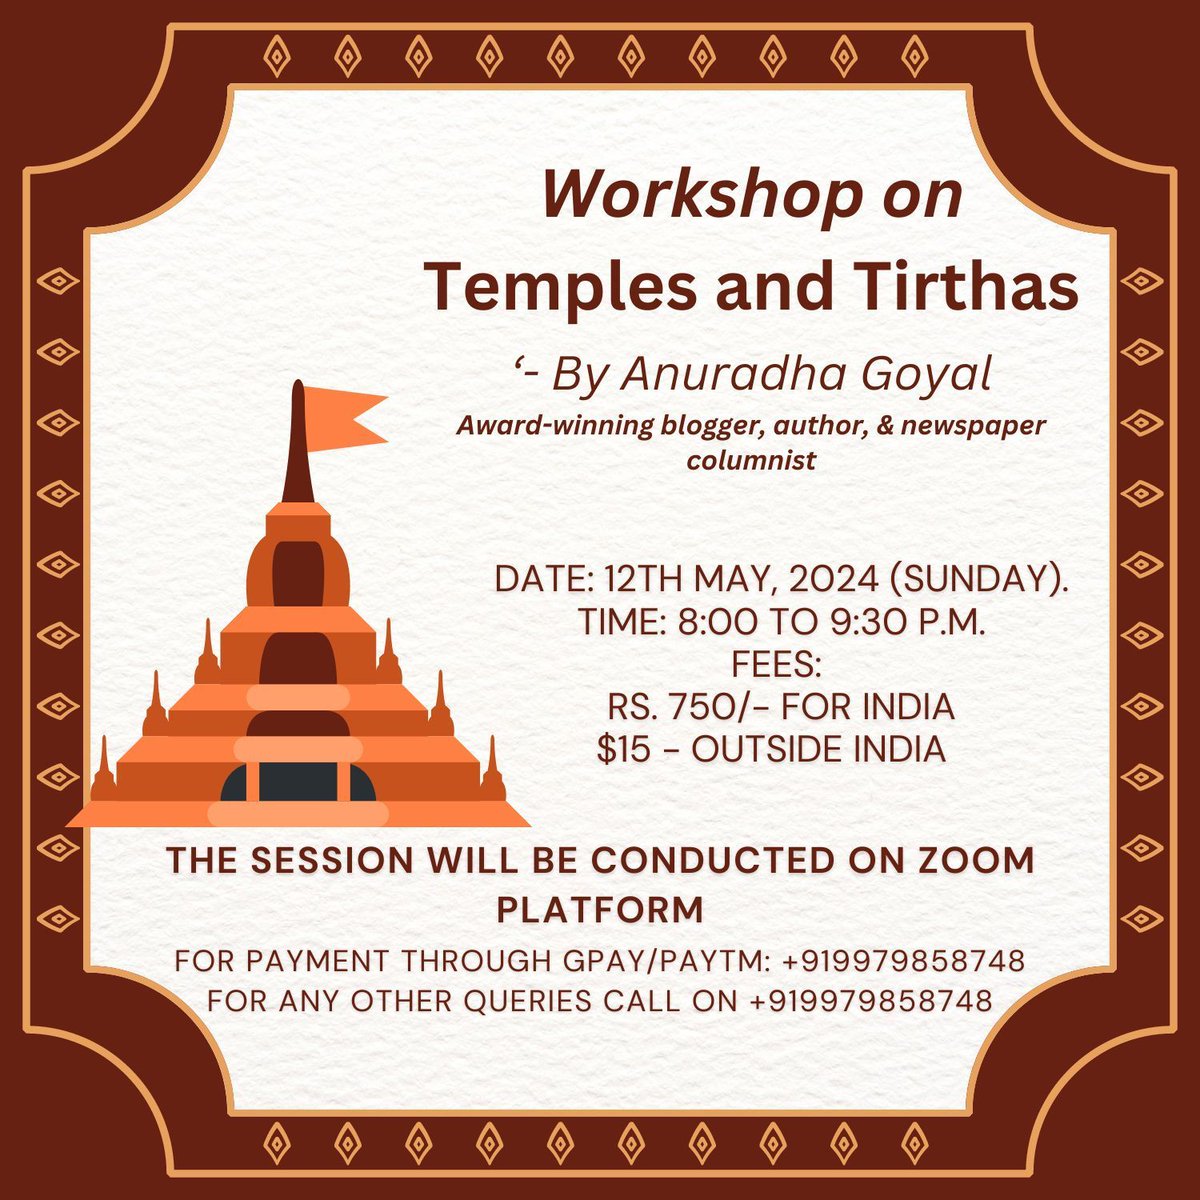 Anuradha Goyal is hosting a workshop on Temples and Tirthas on May 12th from 8 to 9:30 PM via Zoom. Dive deep into the rich heritage of temples and sacred pilgrimage sites. Refer to the attached flyer for details. Reserve your spot now at rb.gy/lfzkx5. @anuradhagoyal